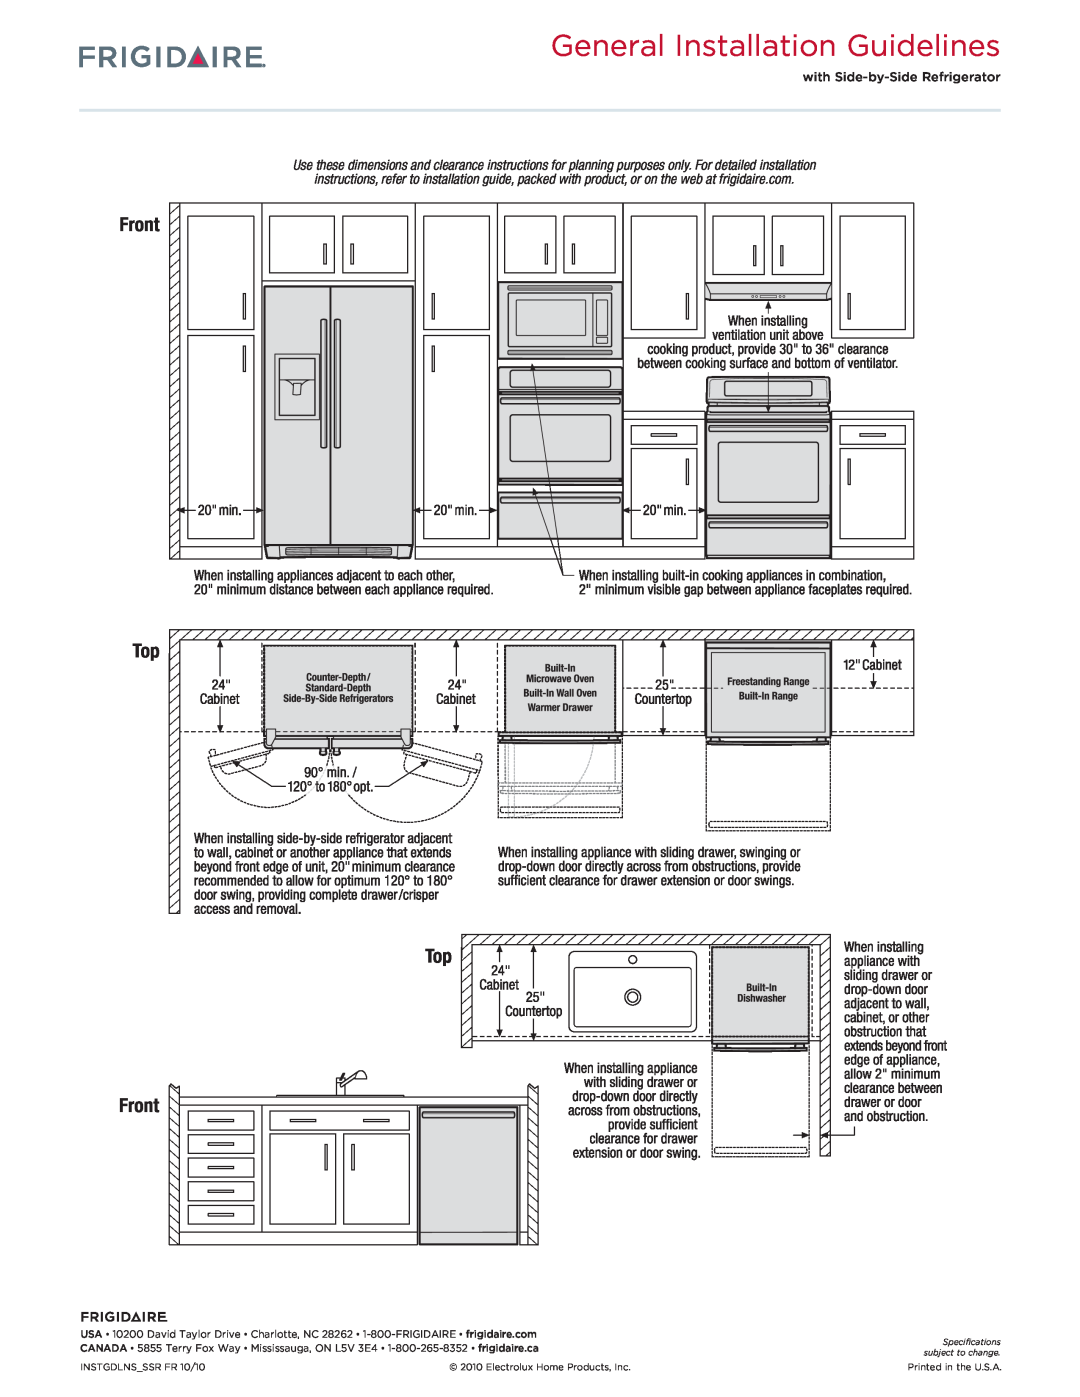 Frigidaire FGMO205K manual General Installation Guidelines, Top Front 